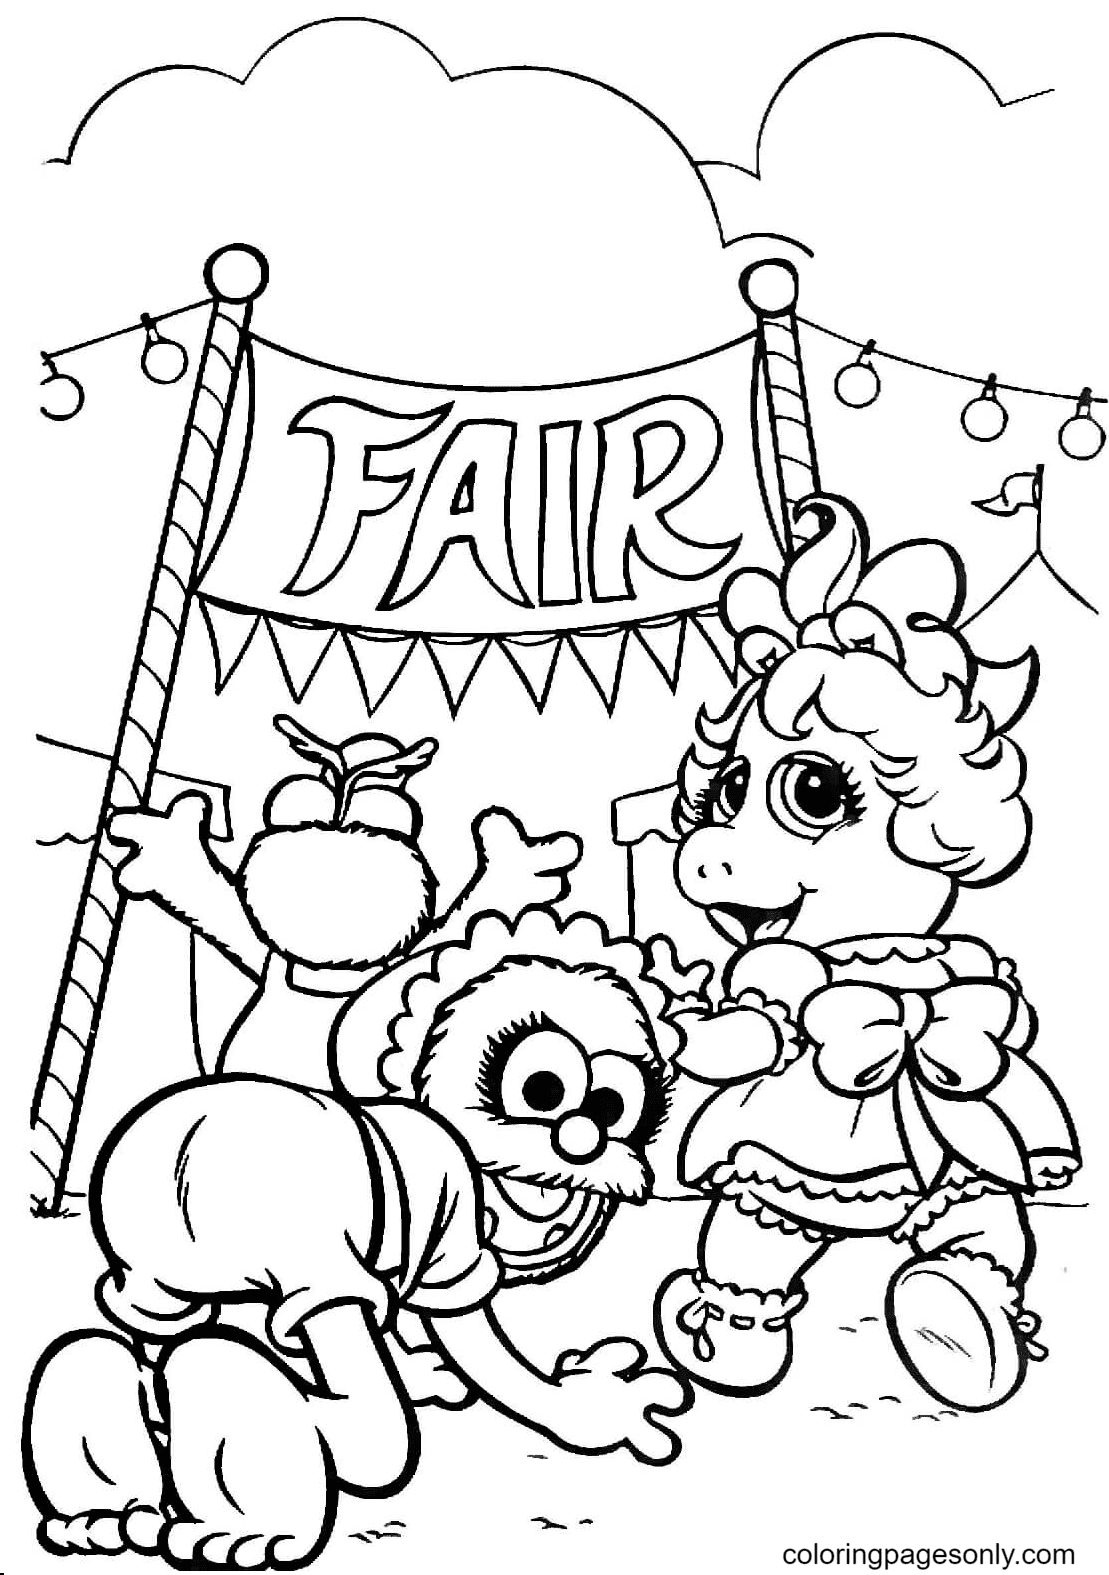 Muppet Babies on a Fair Market Coloring Page